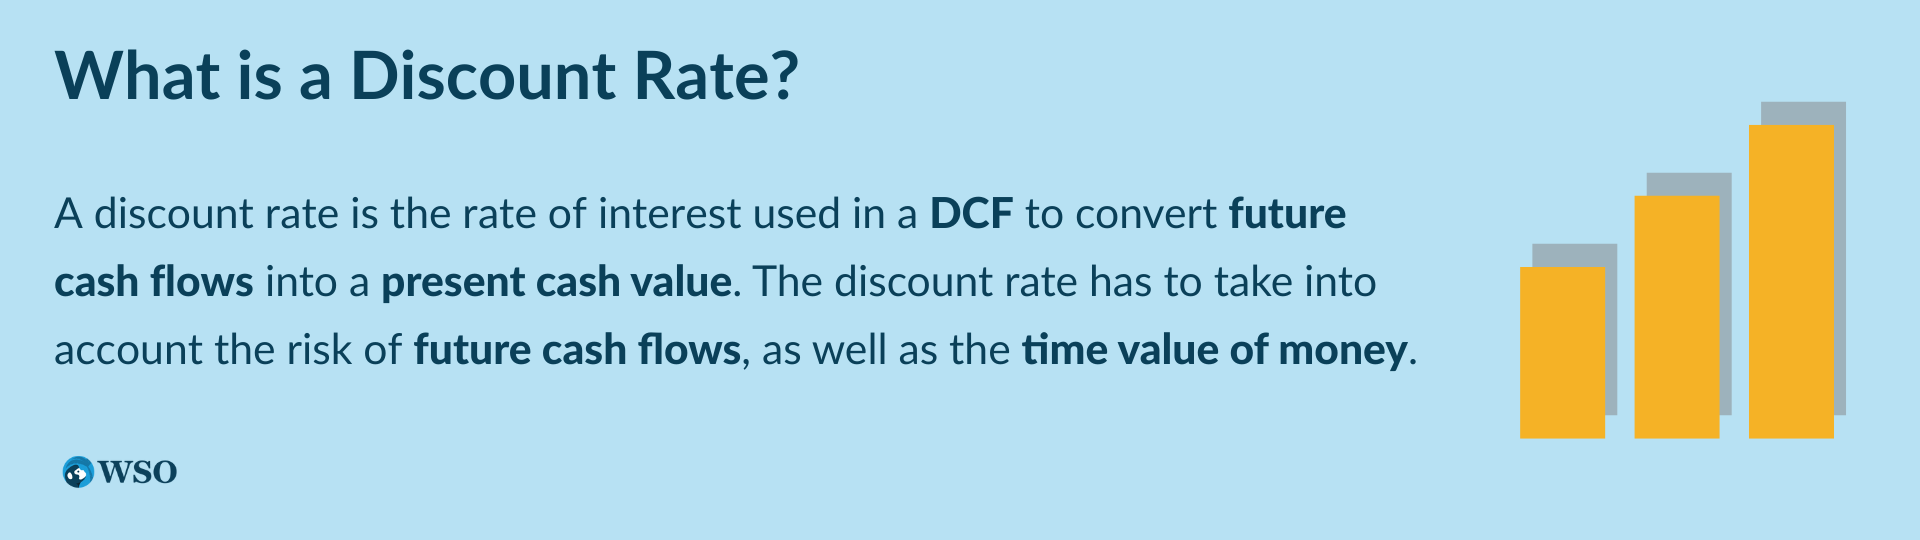 What is a Discount Rate?